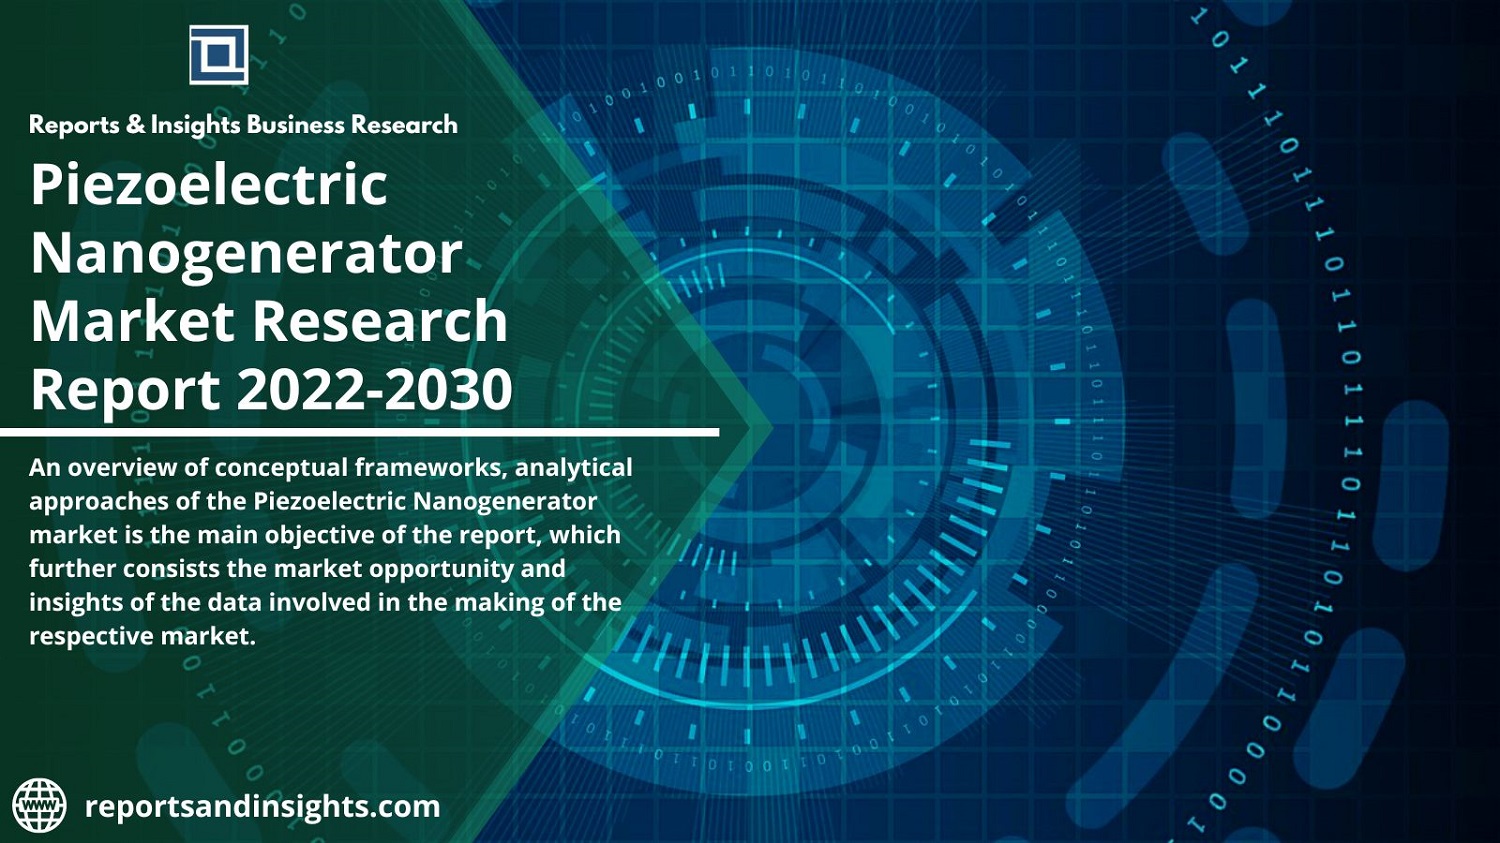 Piezoelectric Nanogenerator Market Reports 2022| Growth, Demand-supply Scenario, Production and Value Chain Analysis, Regional Assessment by 2030| By R&I